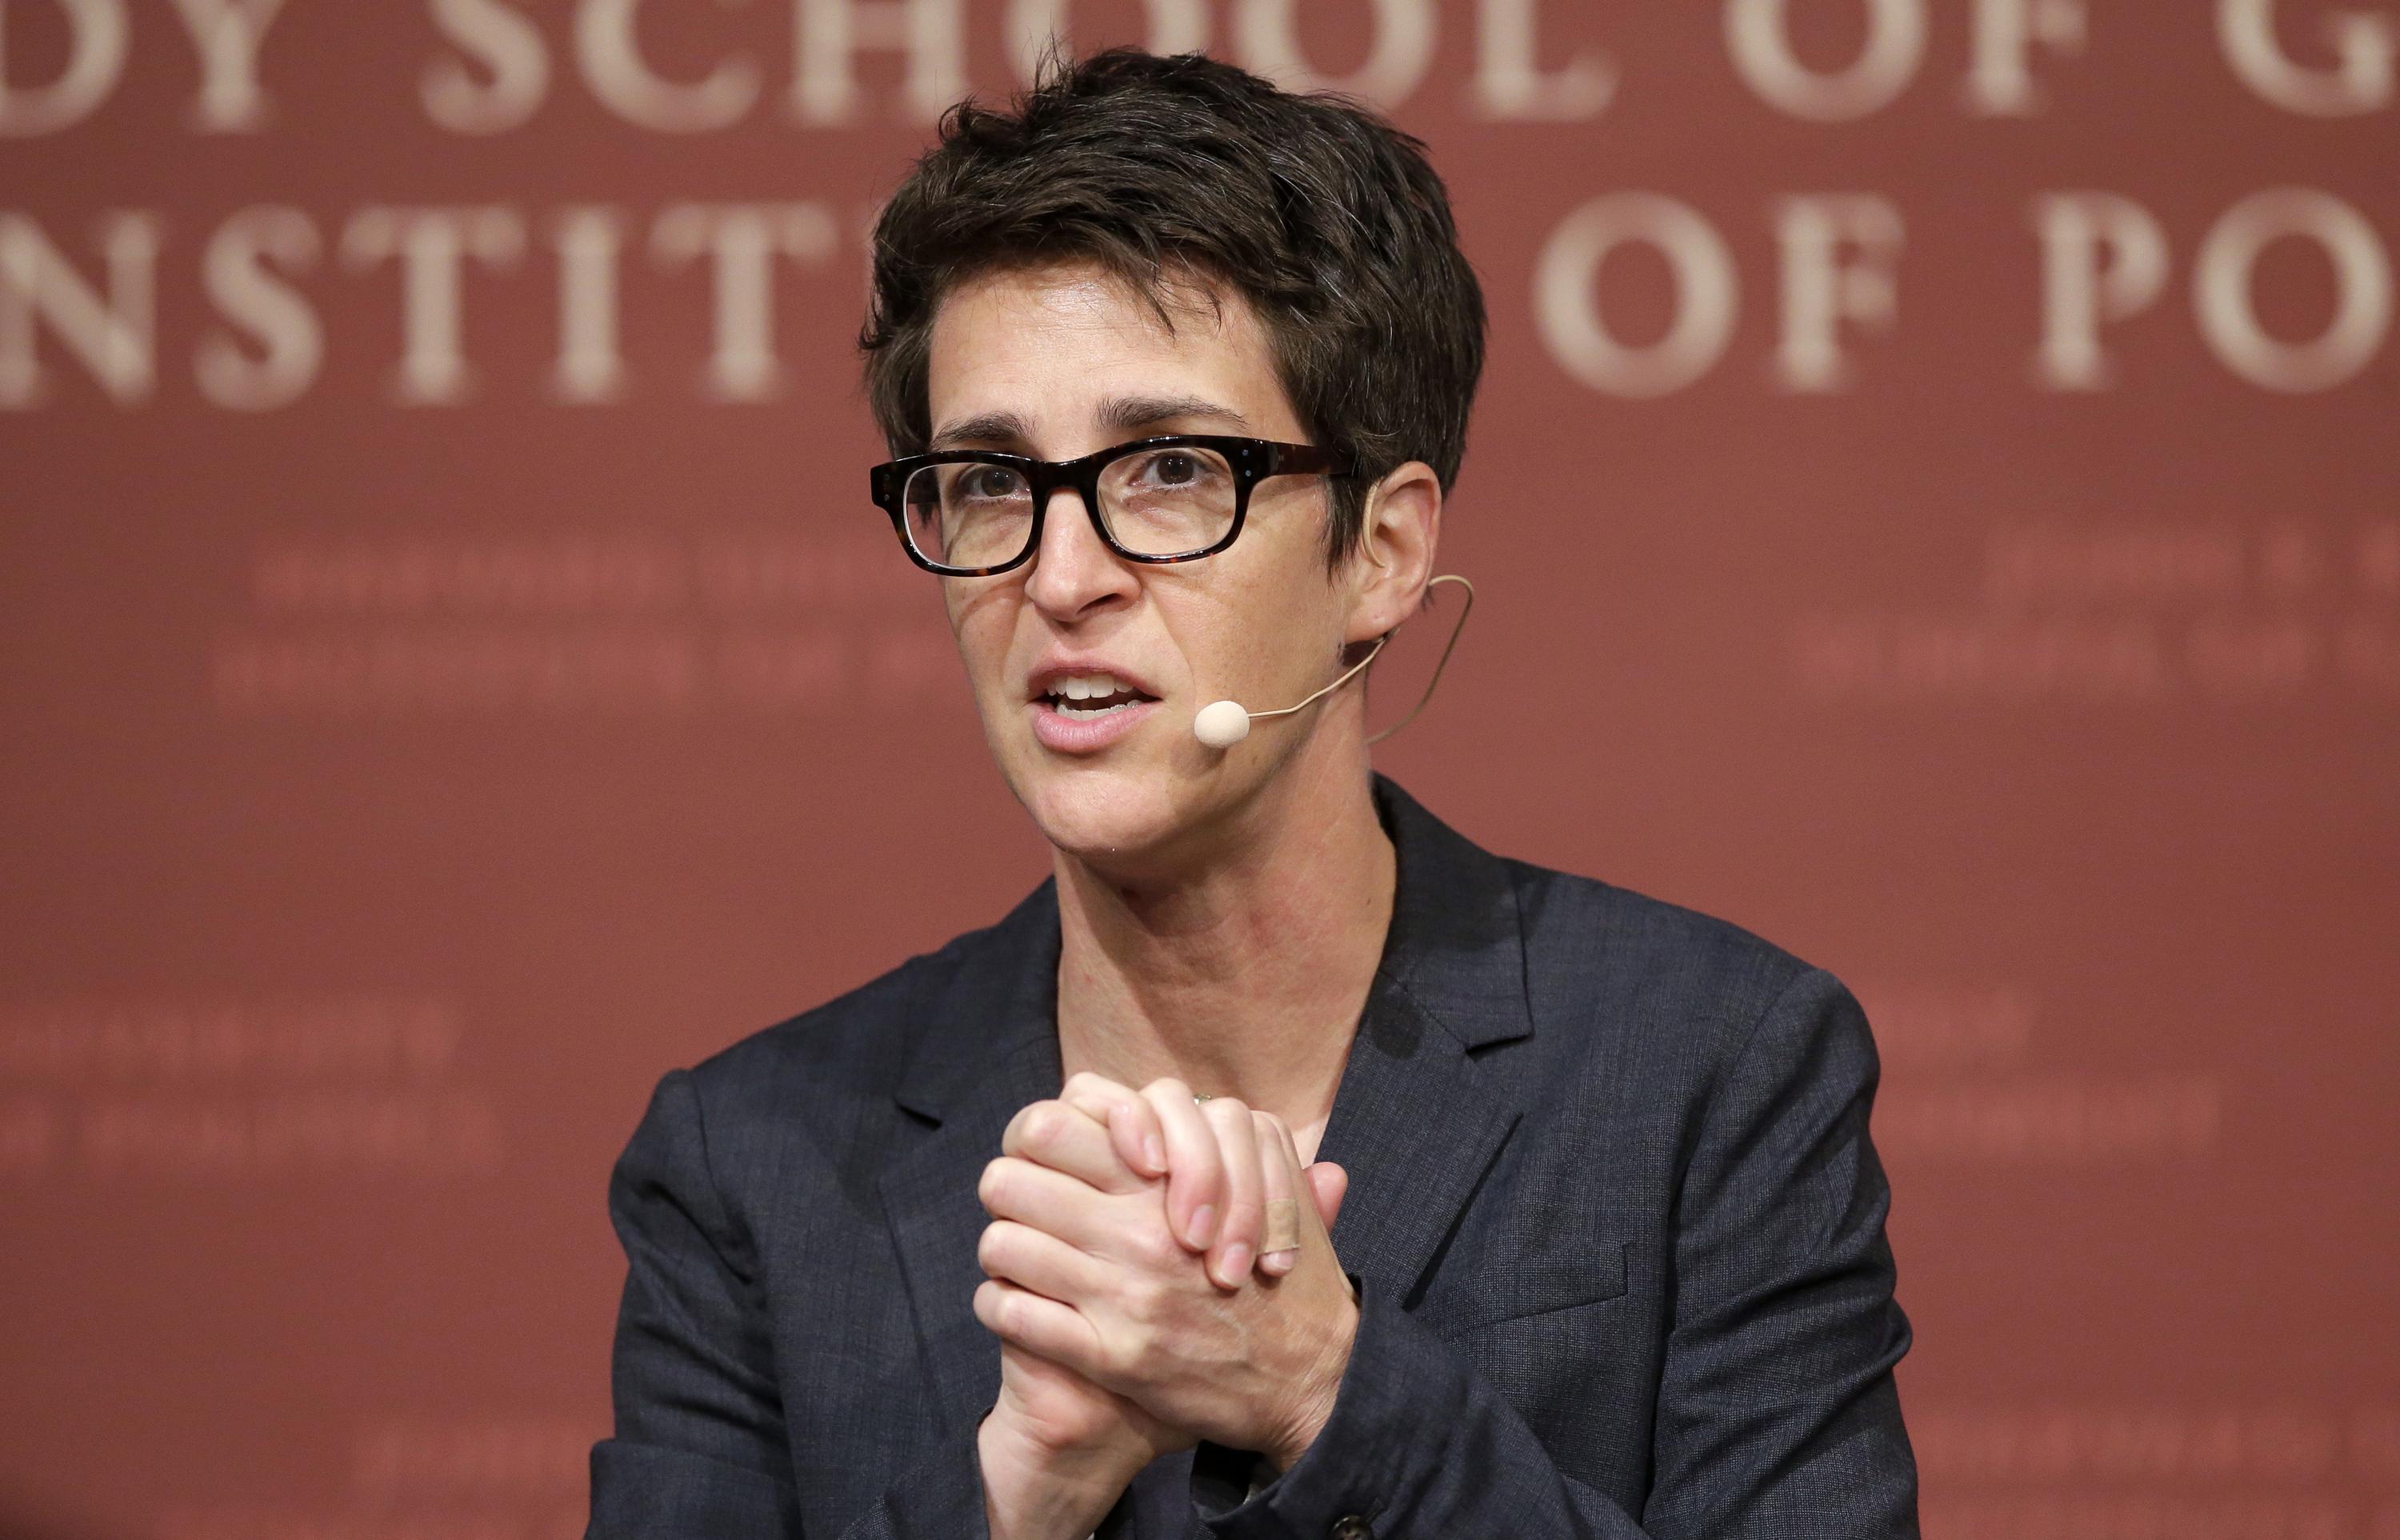 Rachel Maddow returns to MSNBC, will switch to once a week | AP News